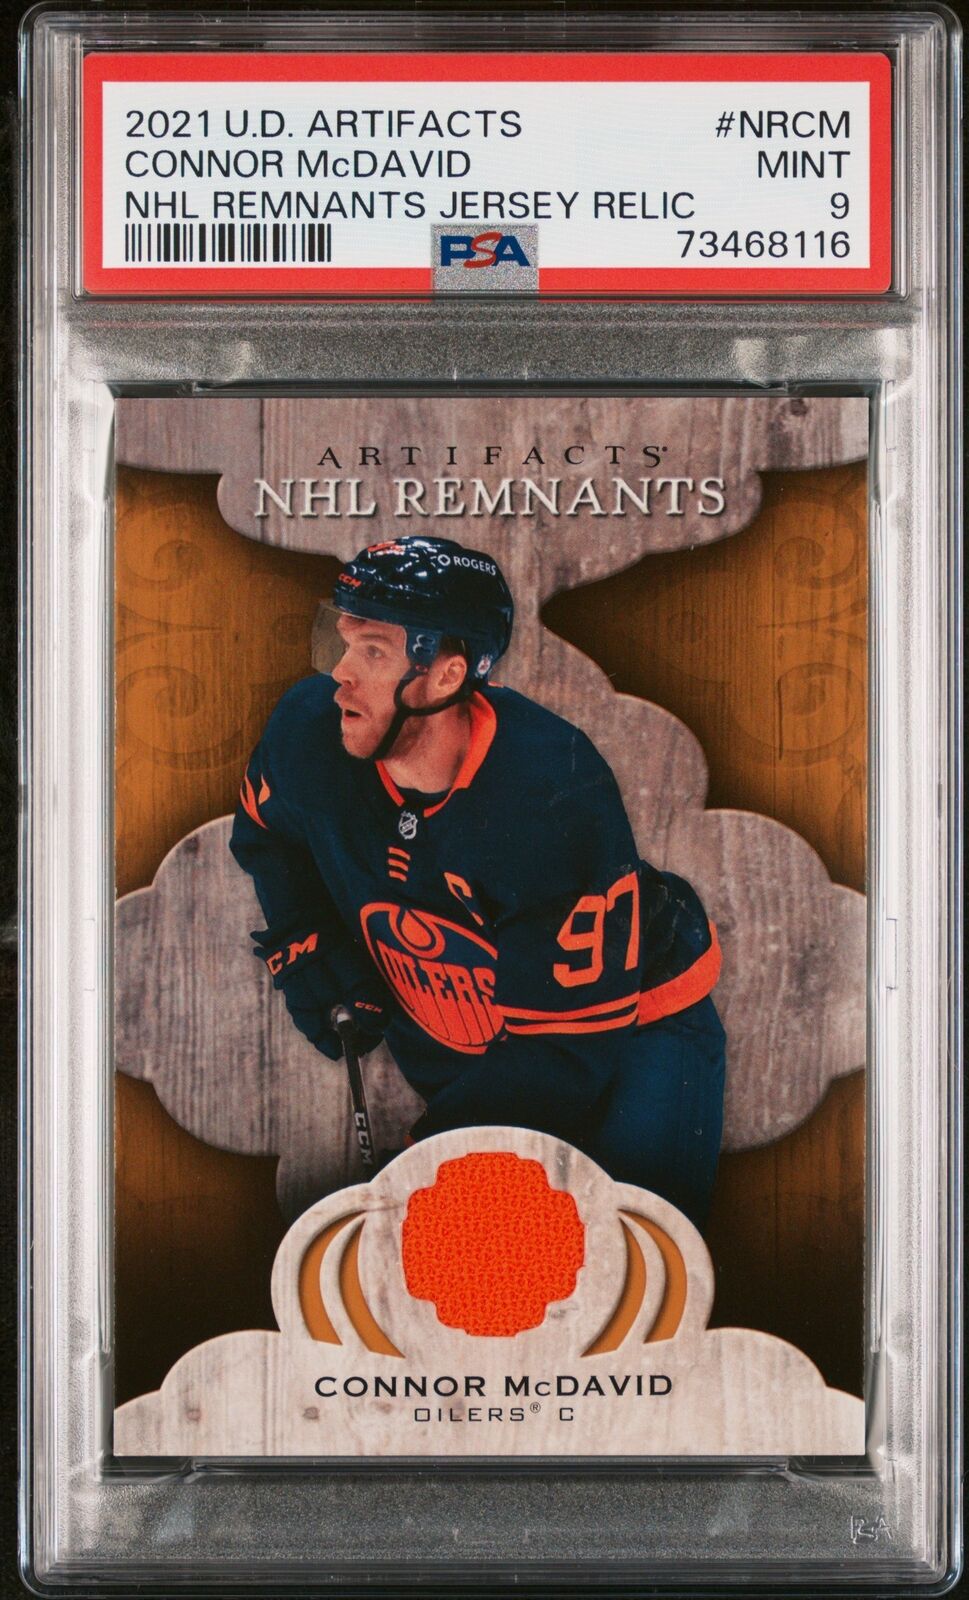 Connor McDavid 2021 Upper Deck Artifacts Game Used Patch Relic Card #NRCM PSA 9